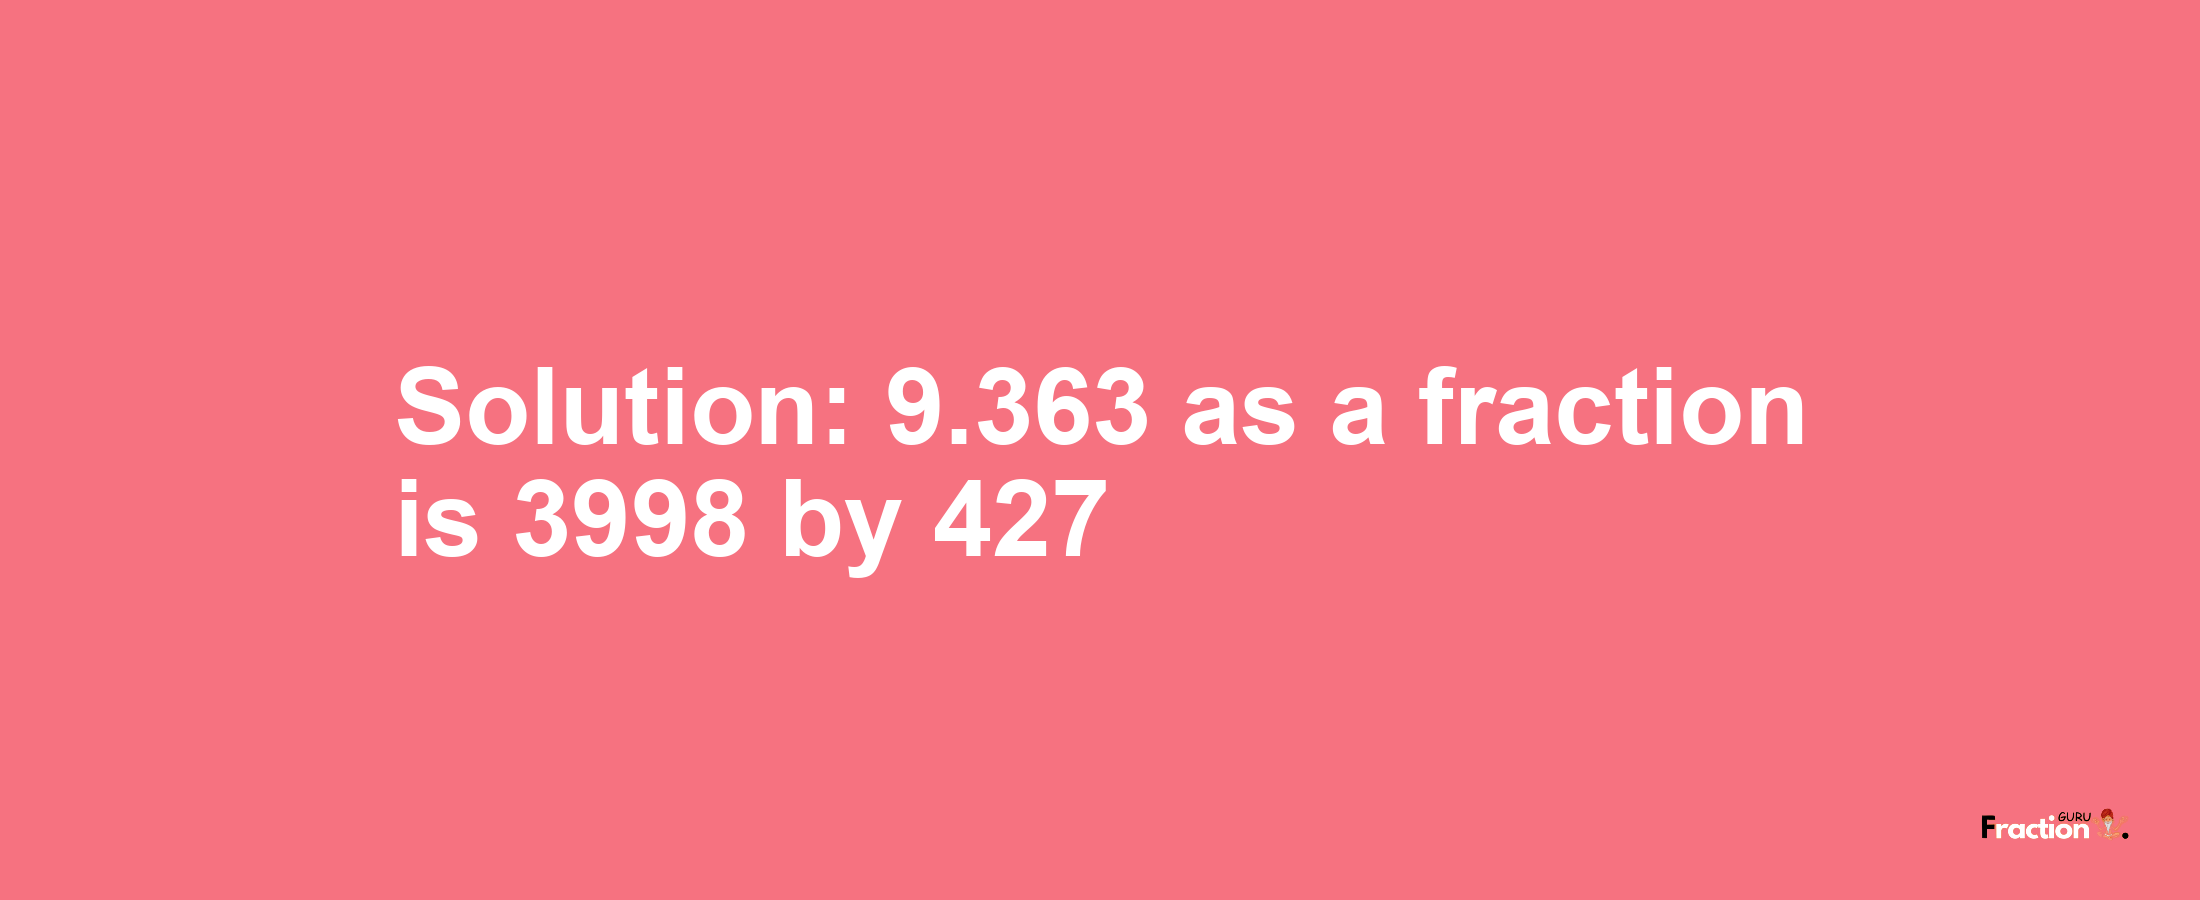 Solution:9.363 as a fraction is 3998/427